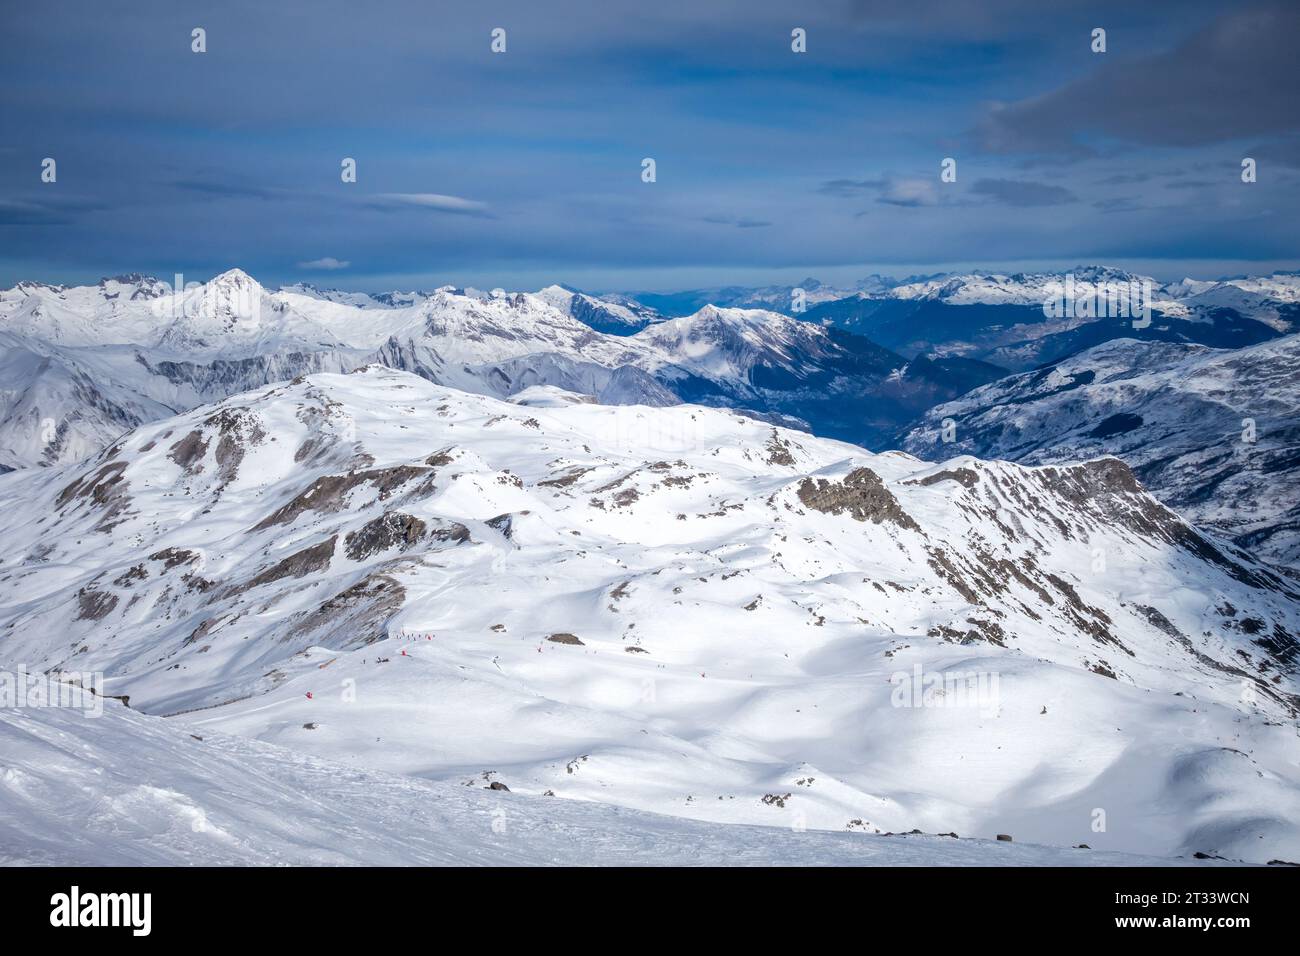 Ski slopes and mountains of Les Menuires resort in the french alps, France Stock Photo